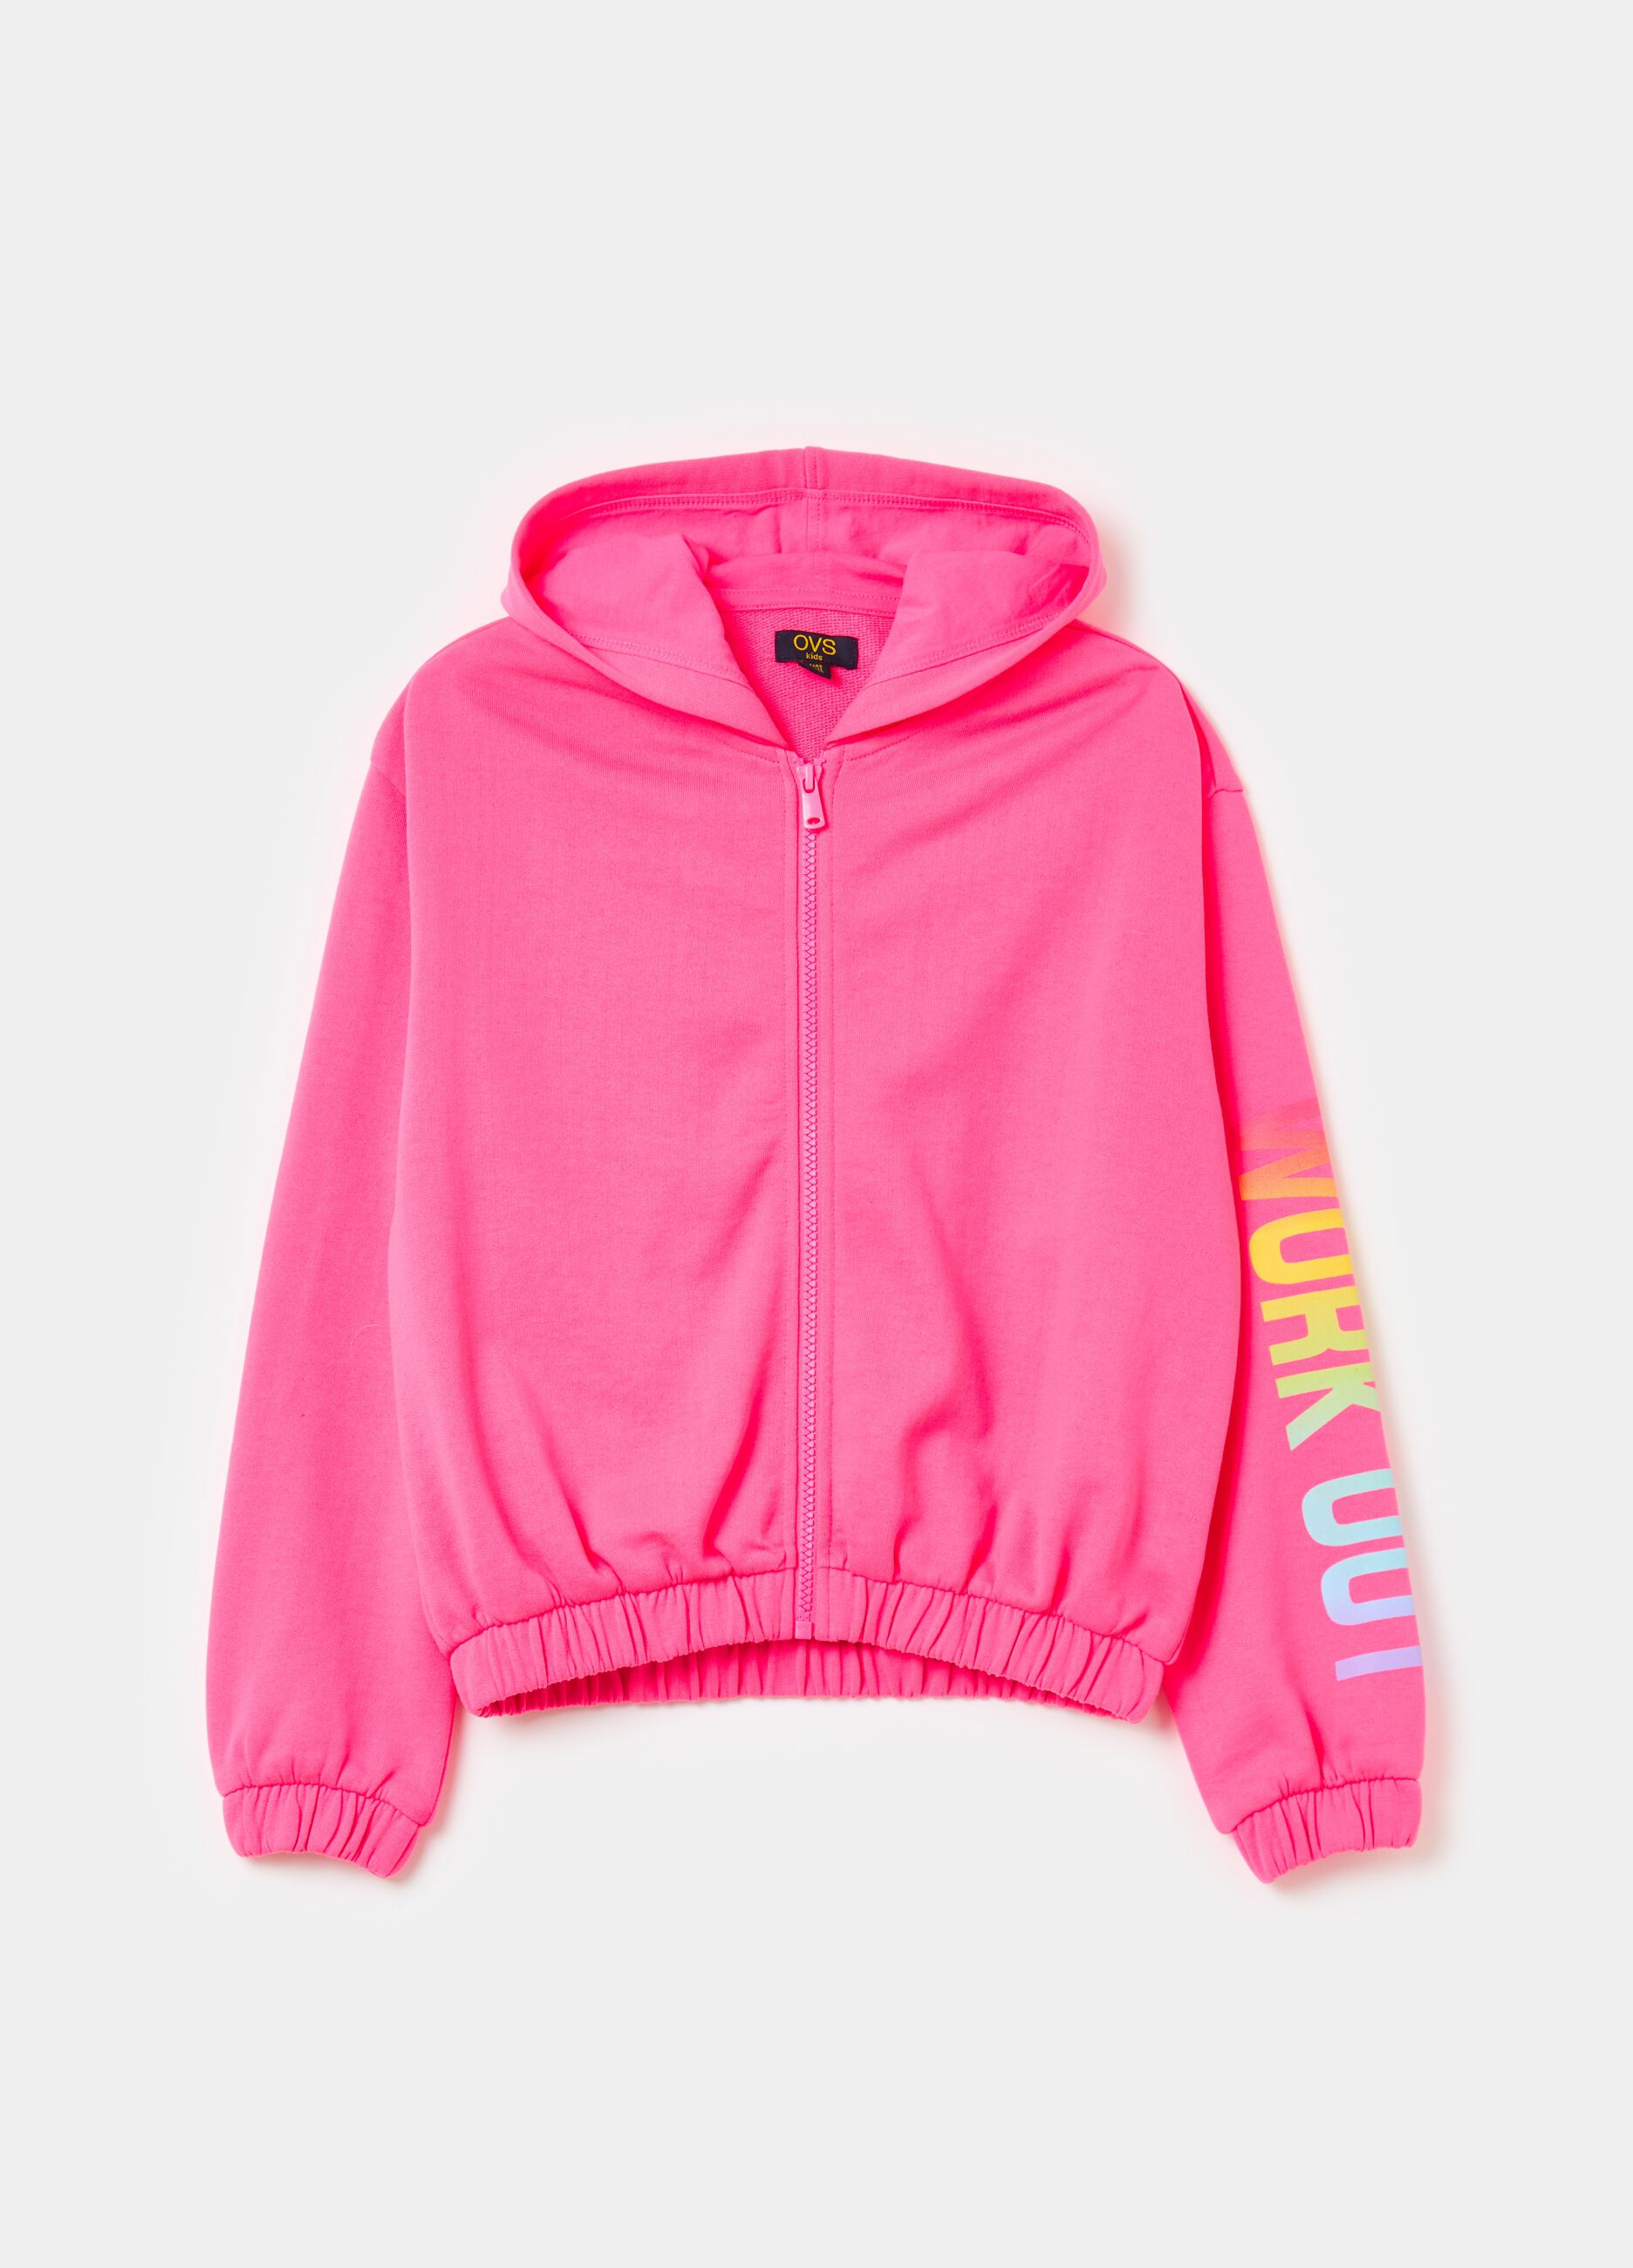 Sweatshirt with multicoloured lettering print